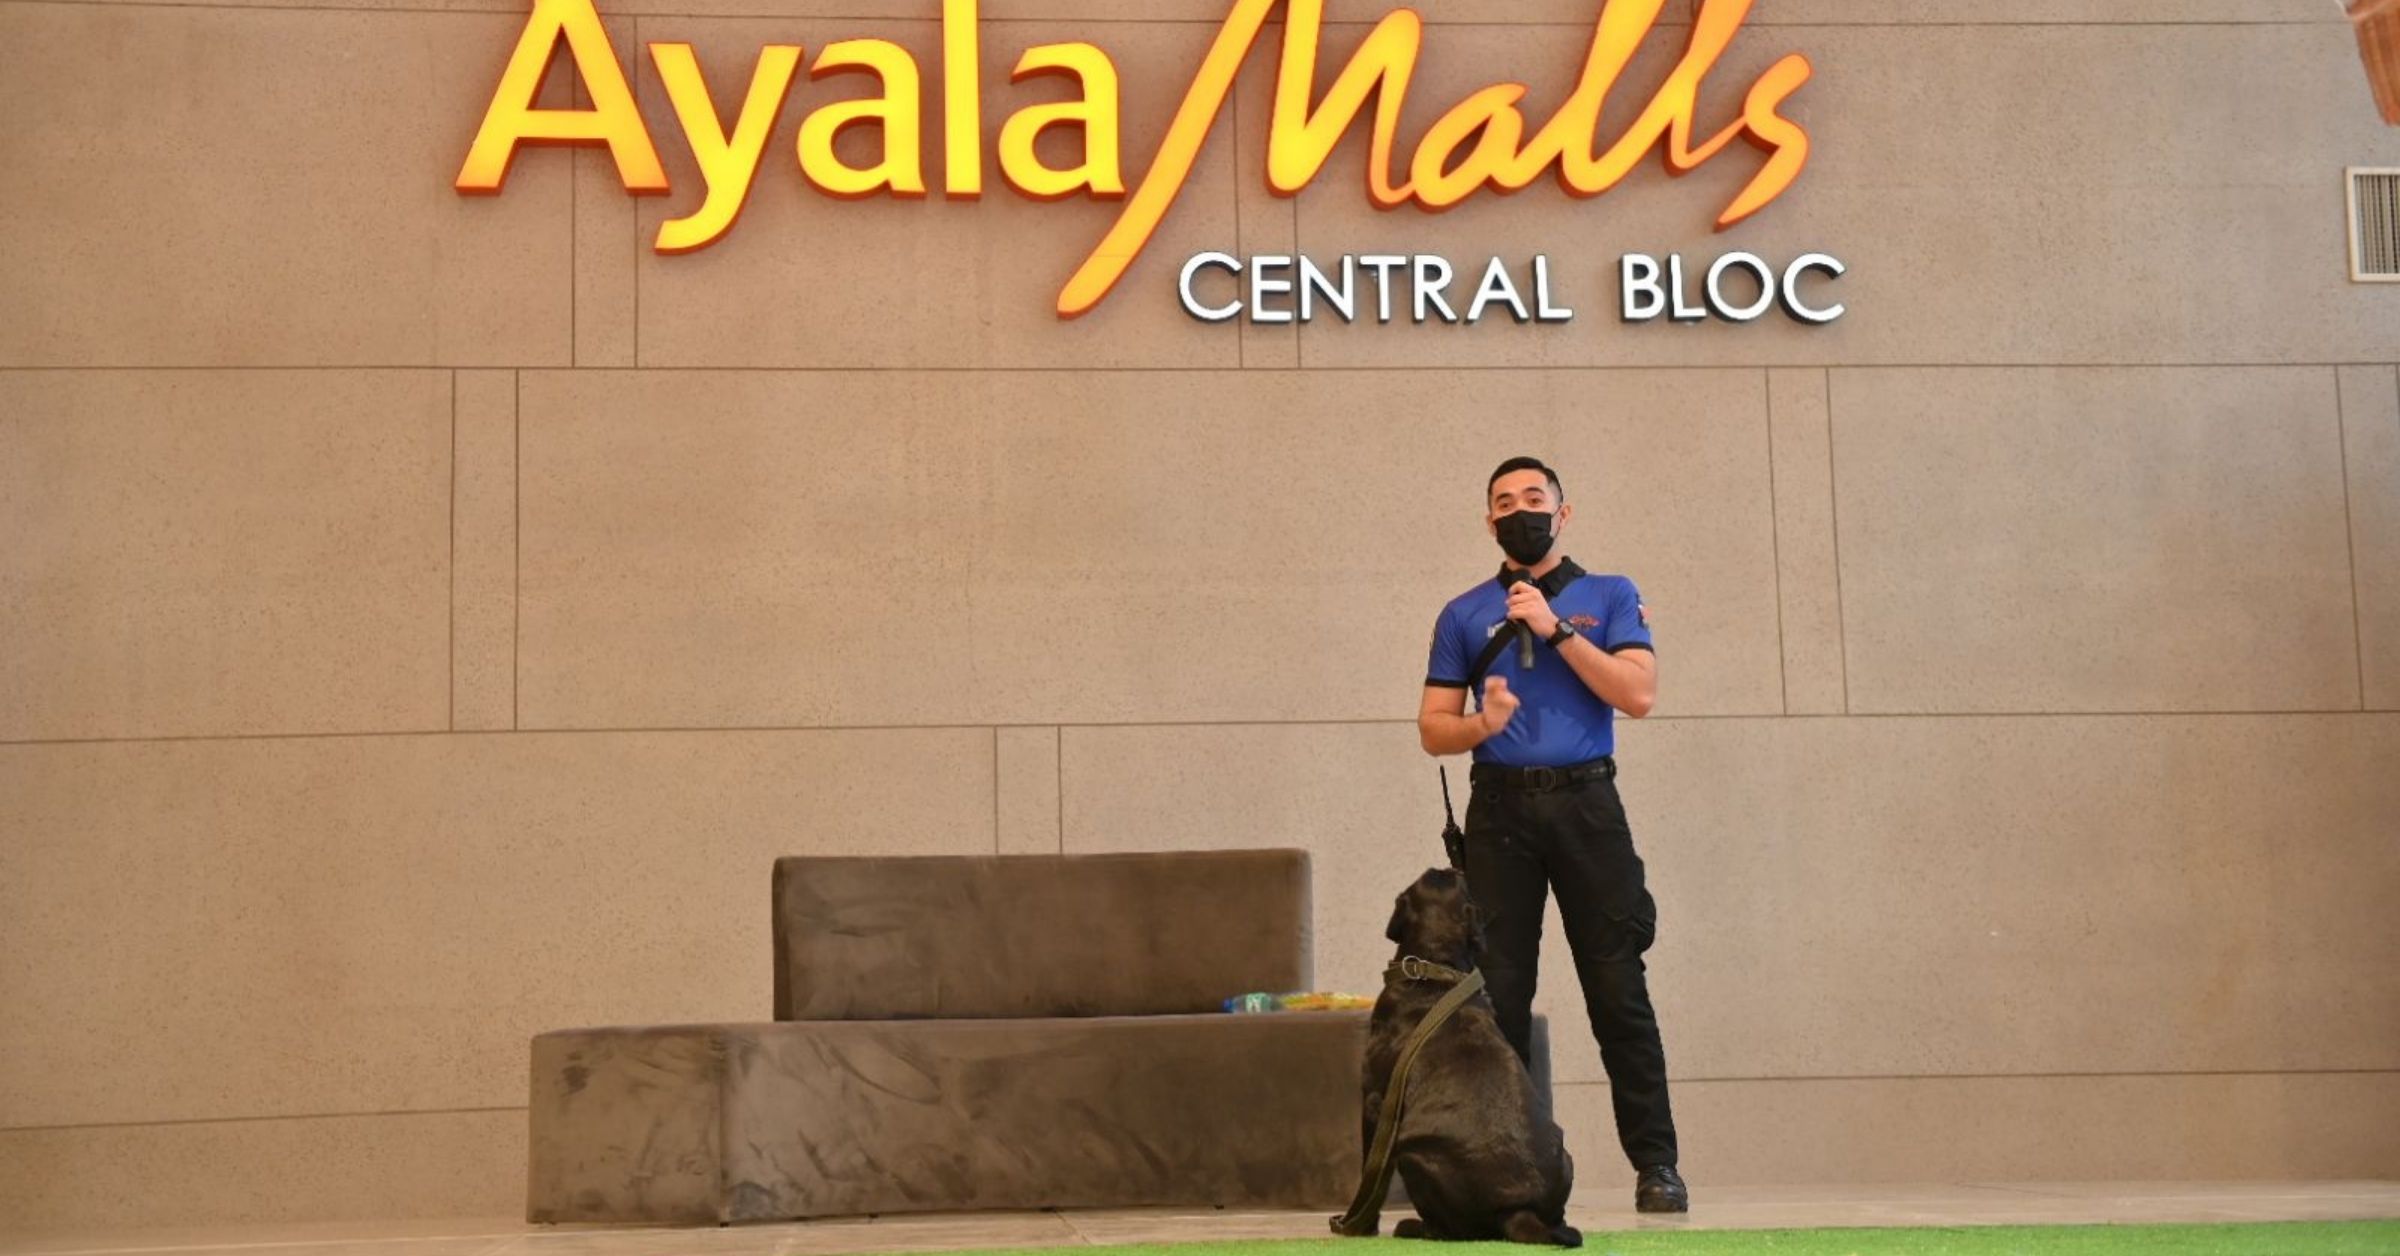 It’s A Pawty Weekend at the Ayala Malls Central Bloc